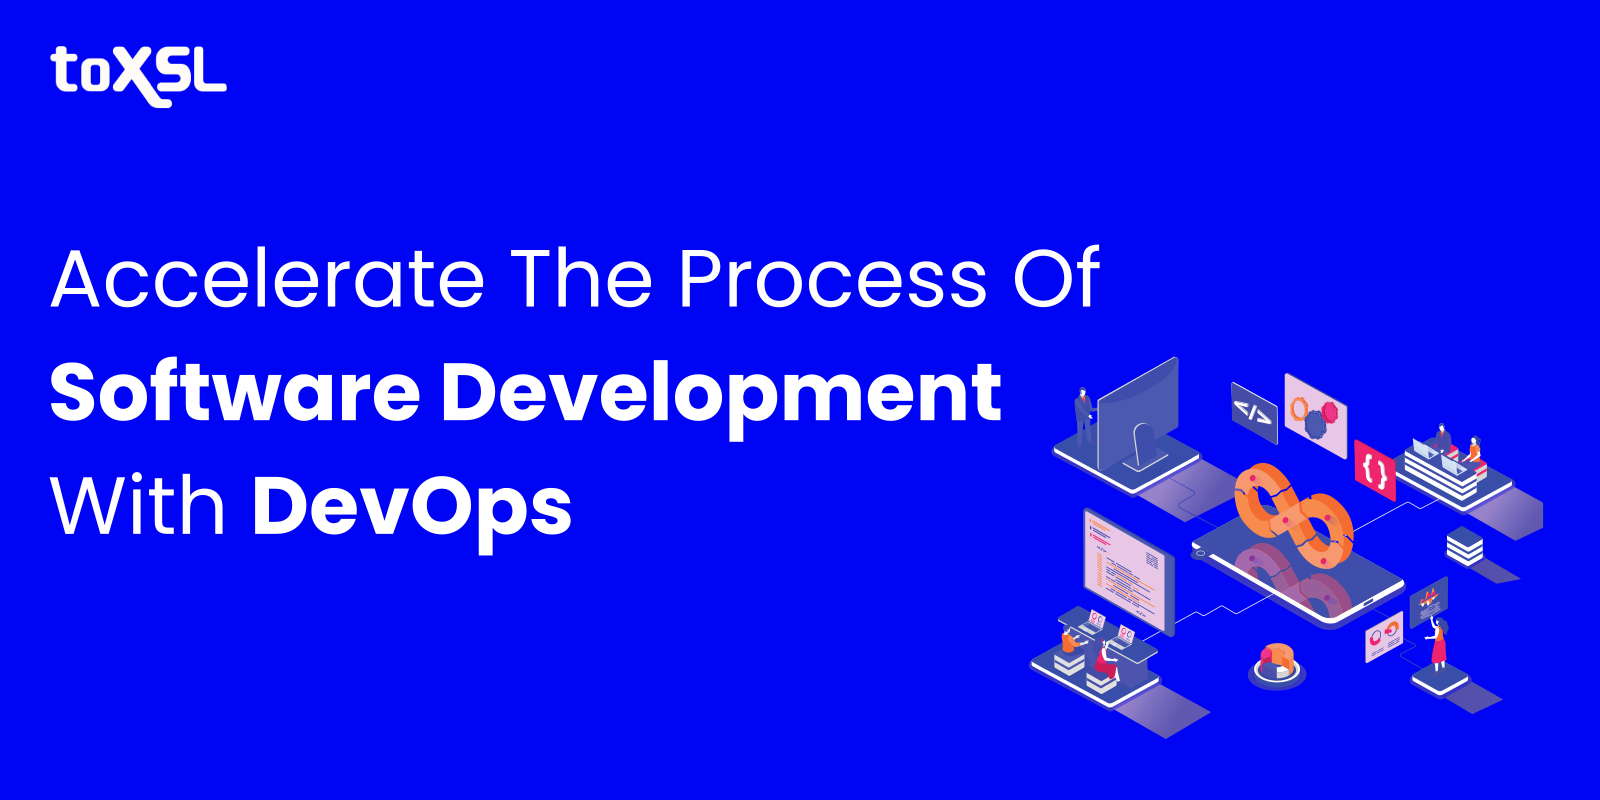 How DevOps Acts as a Key to Accelerate the Process of Software Development?